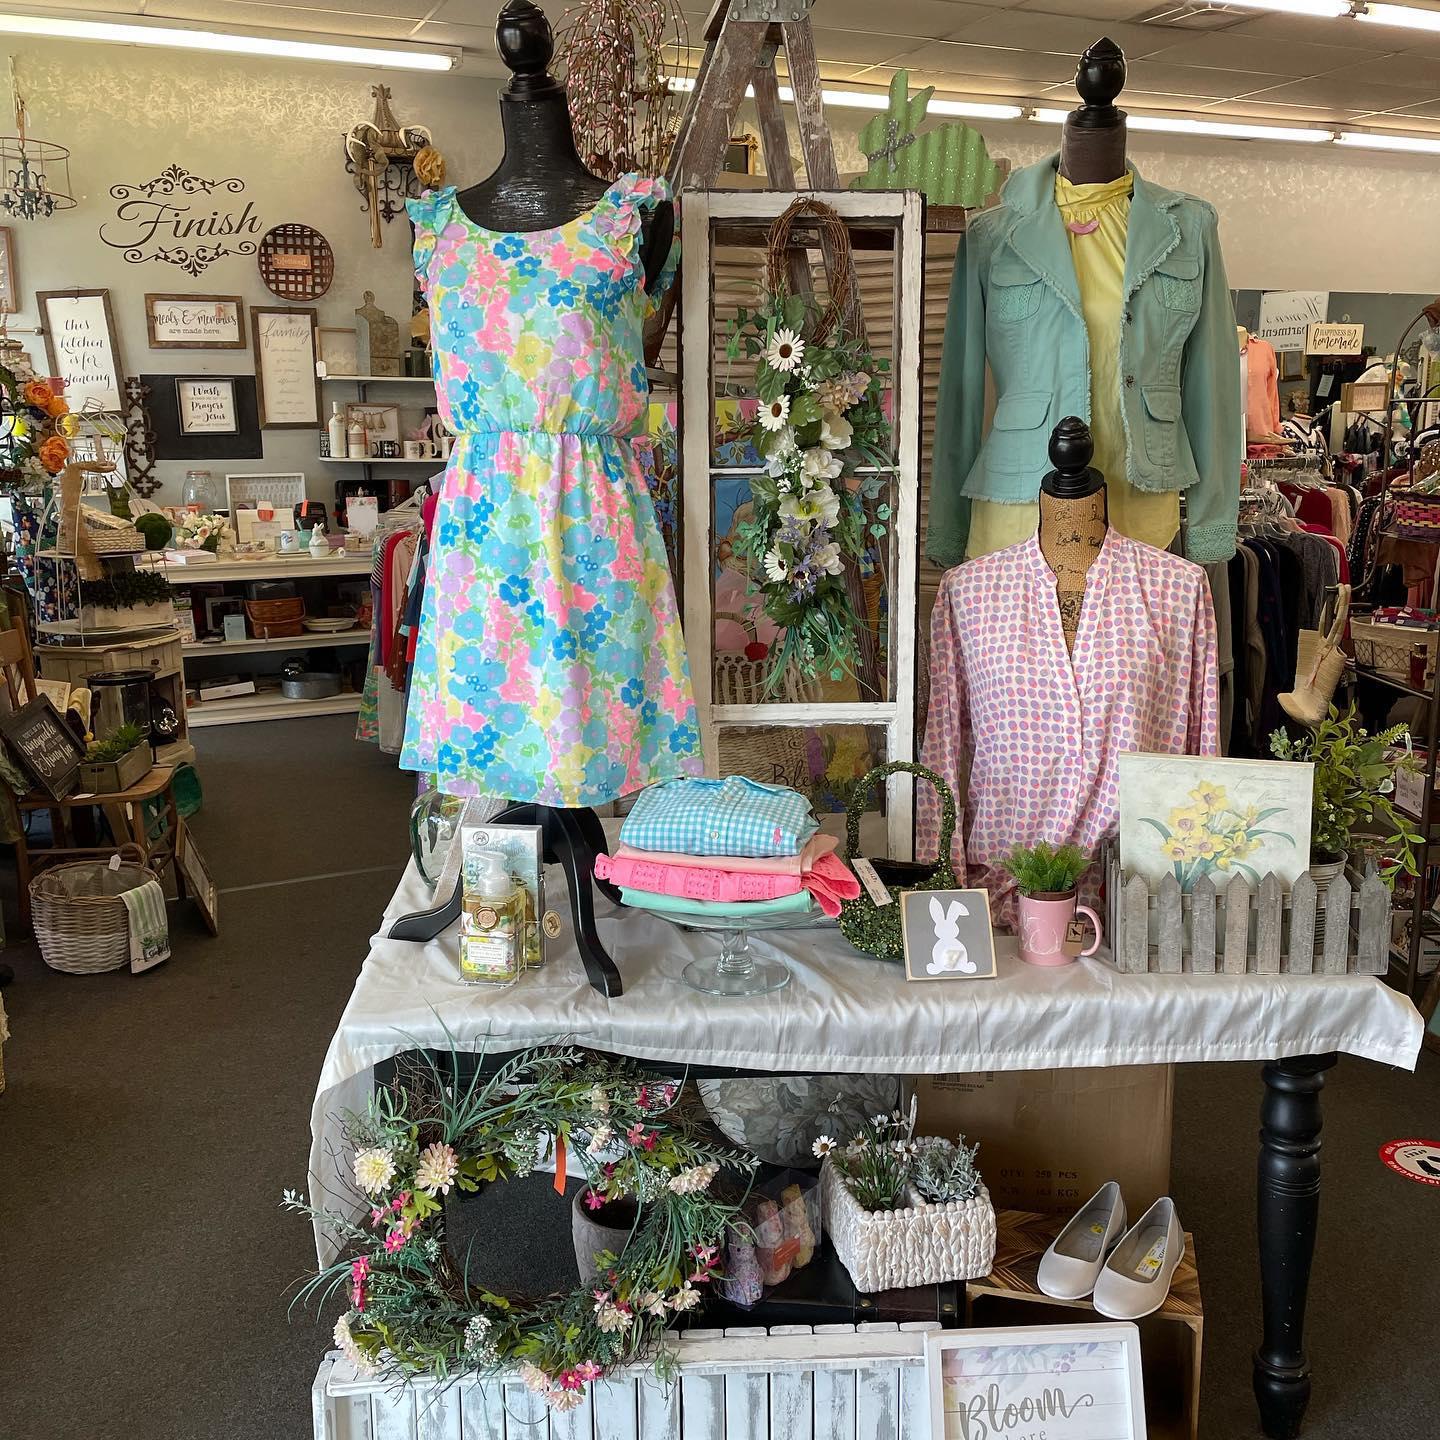 For the past 20-plus years, Gerri's Closet Consignment Boutique has brought ladies all the hottest fashions in clothing, shoes and boots, handbags, jewelry, candles and home deÌcor items. With darling shabby chic deÌcor and inviting merchandising, it's like a fine women's clothing store at the mall, only at a fraction of the price! Owner, founder and namesake Gerri Talevich loves what she does and it shows. Her weekly 